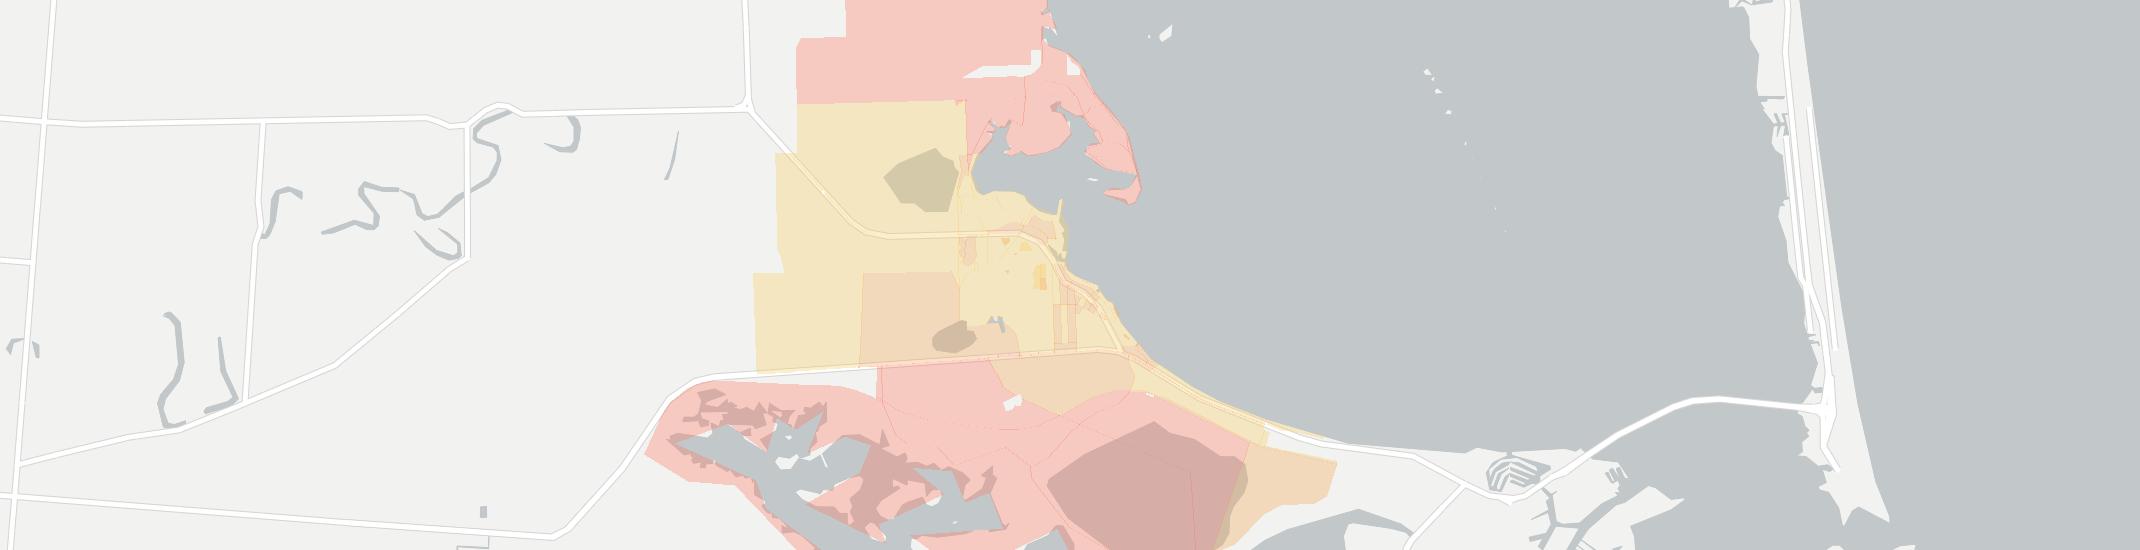 Laguna Vista Internet Competition Map. Click for interactive map.